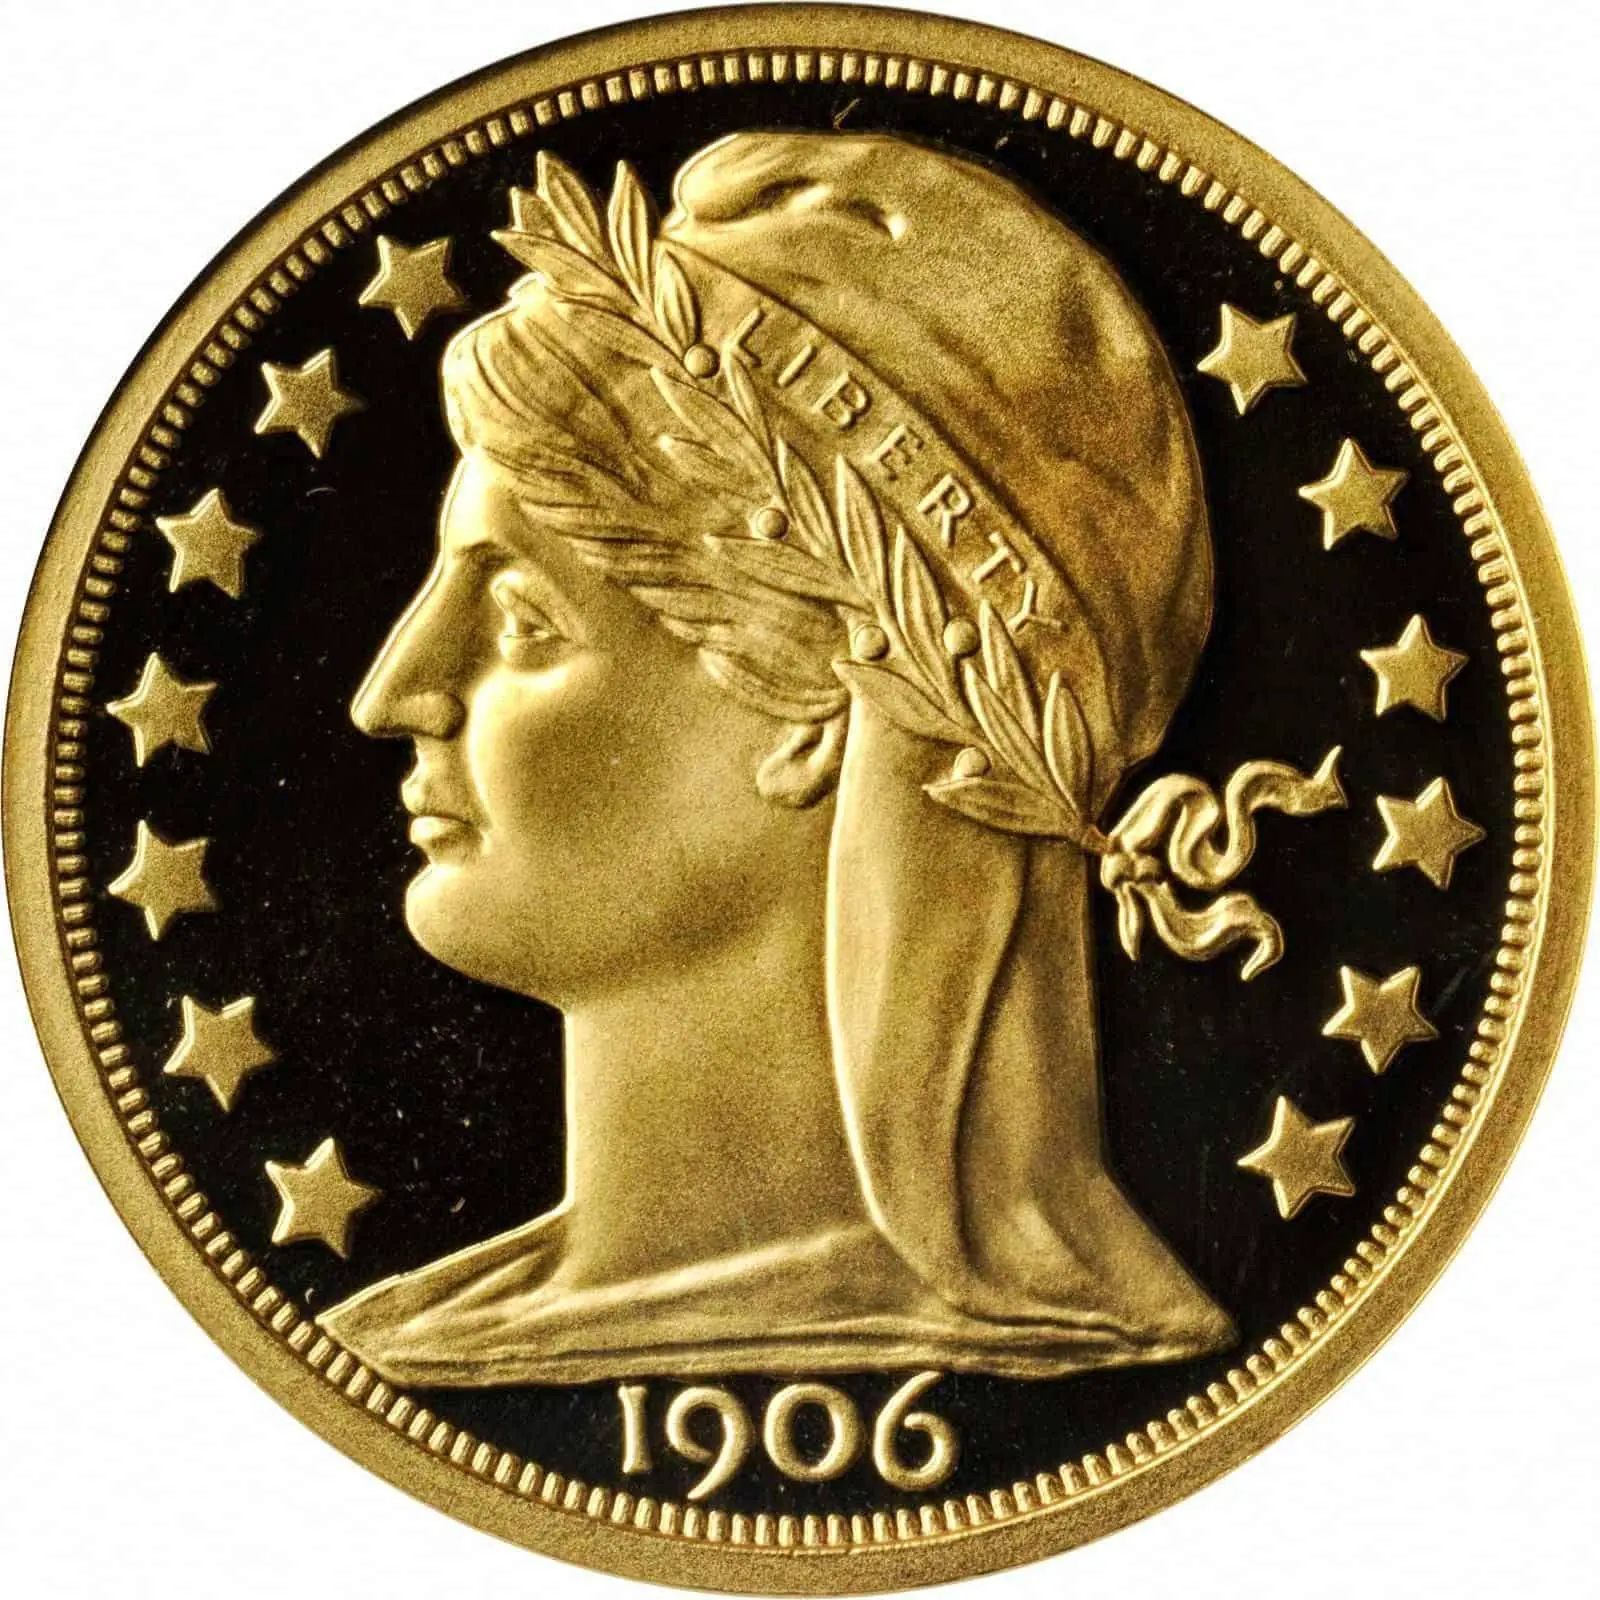 What Is The Best Gold Coin To Buy For Investment